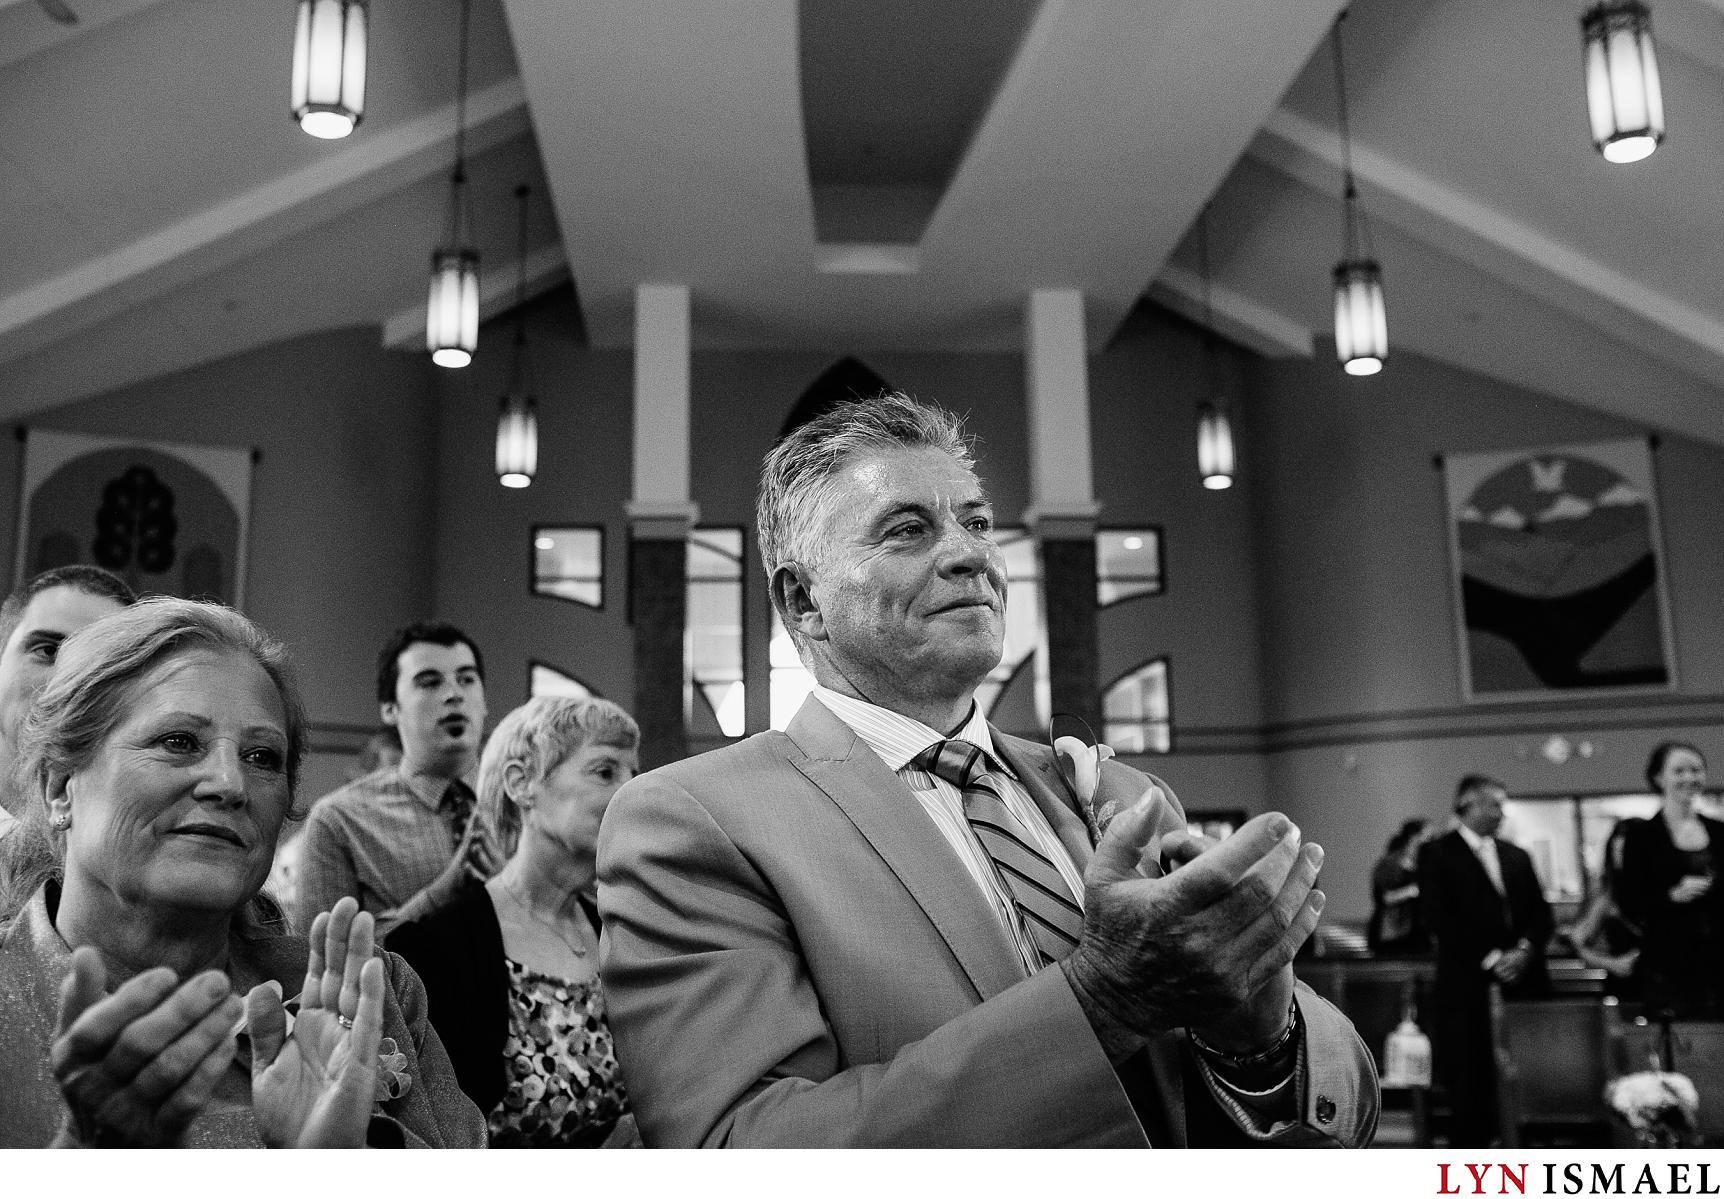 A proud father of the bride watches his daughter wed at the Immaculate Heart of Mary Roman Catholic Church in Stoney Creek, Ontario.